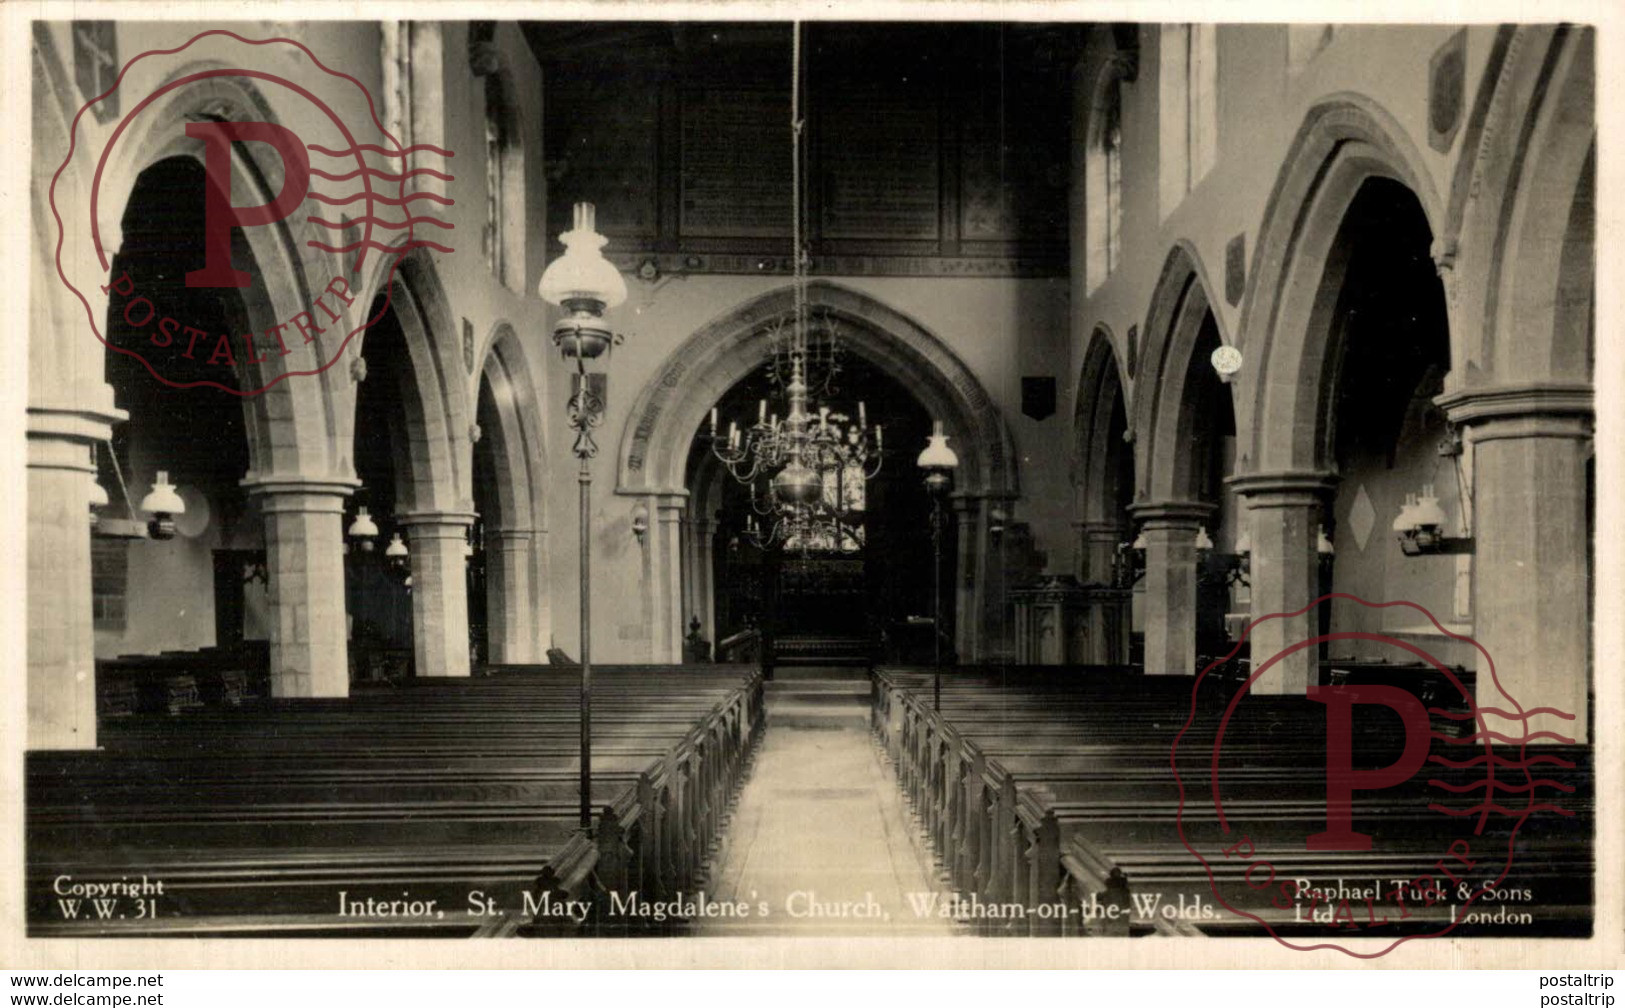 St. Mary's Magdalene's Church. Reino Unido - Leicester